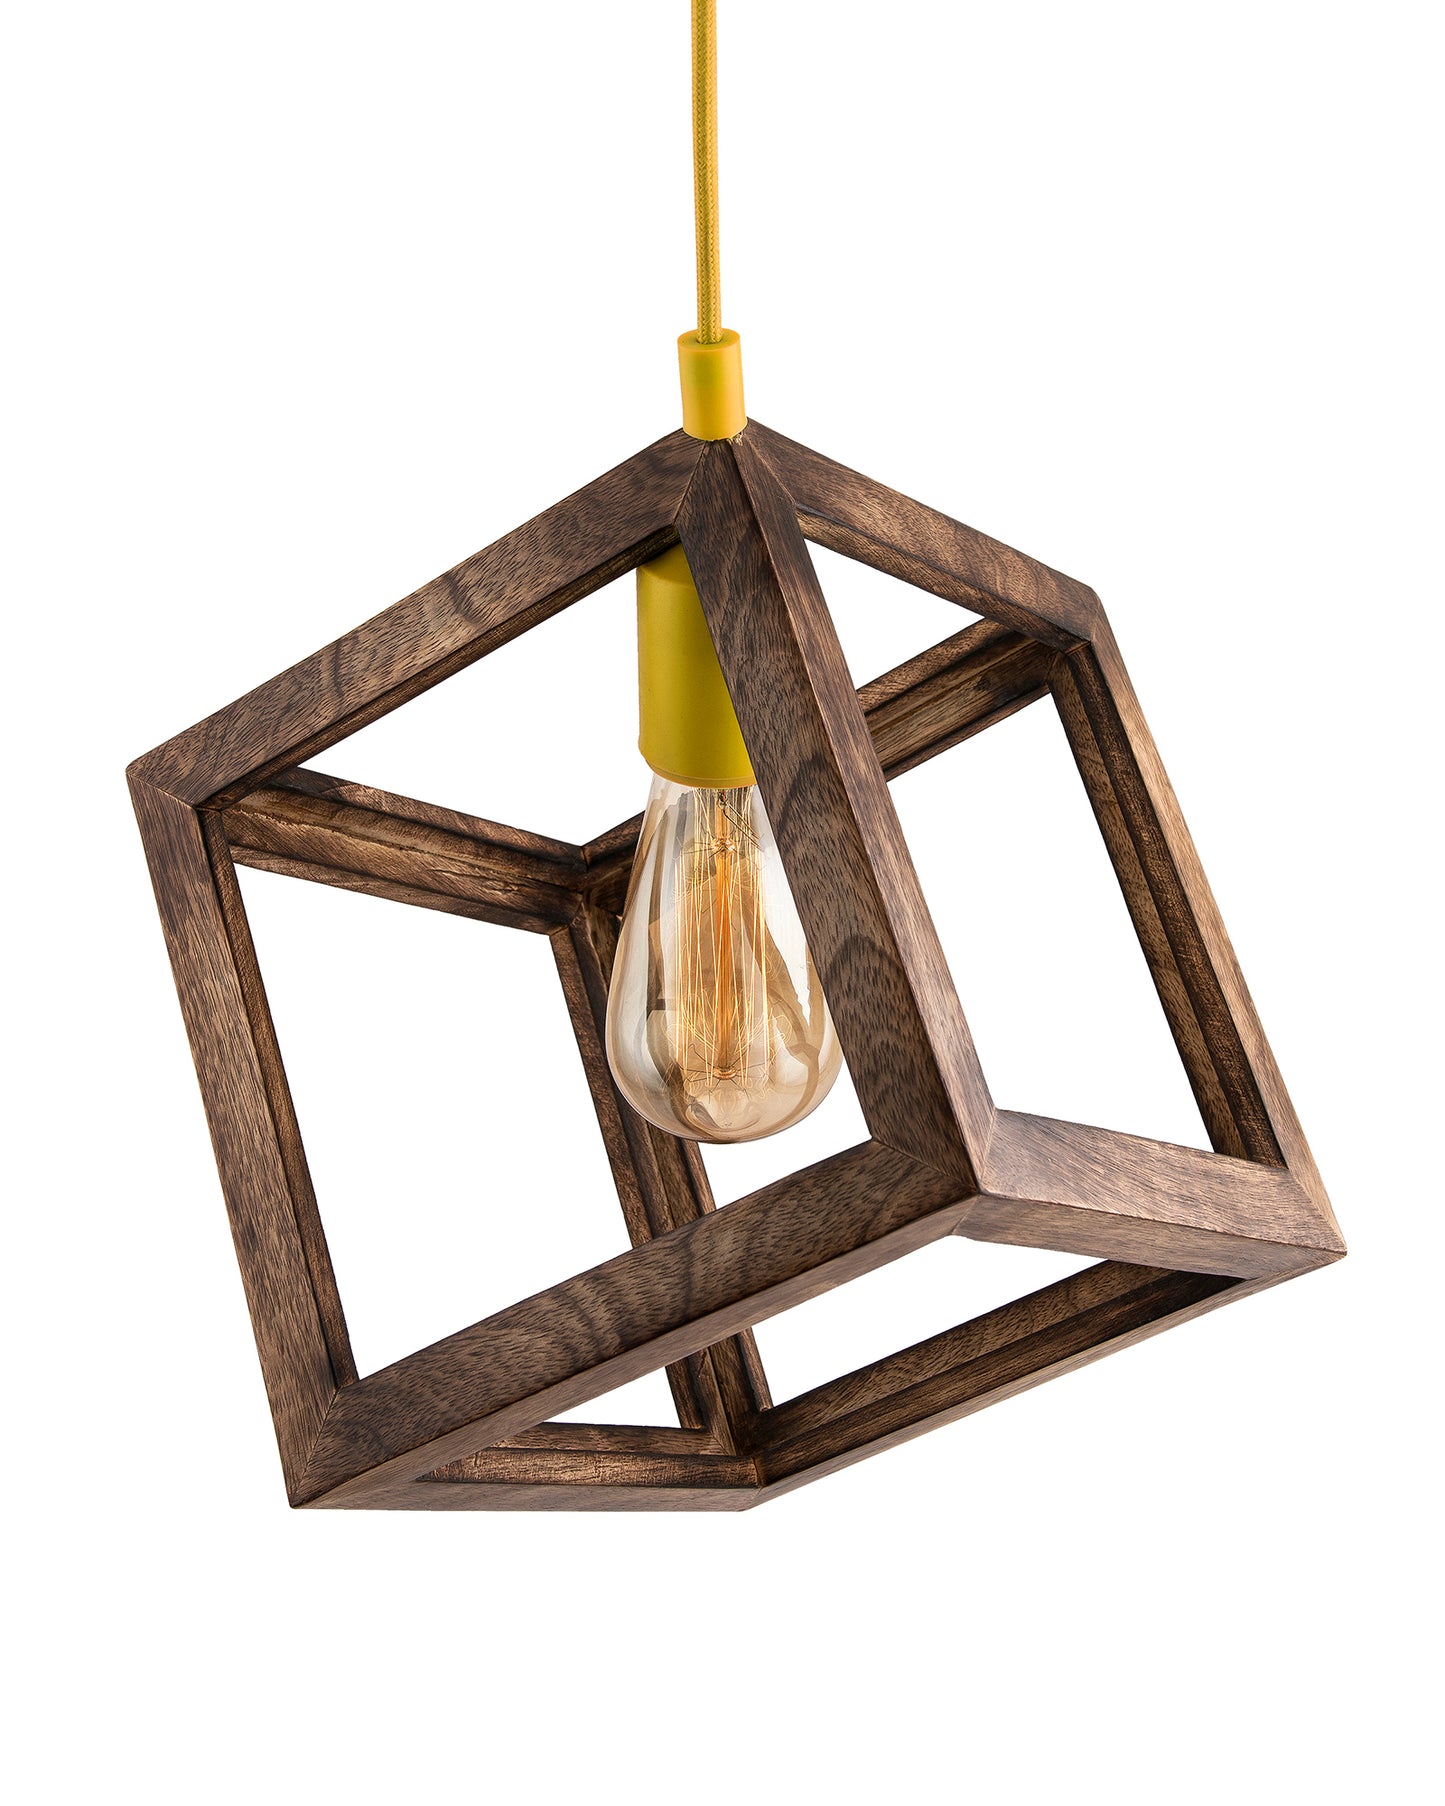 Modern Antique Wooden Pendant Cube Light, with White Silicon Holder, Restaurant Dining Kitchen Hanging Light with Fixture, LED/Filament